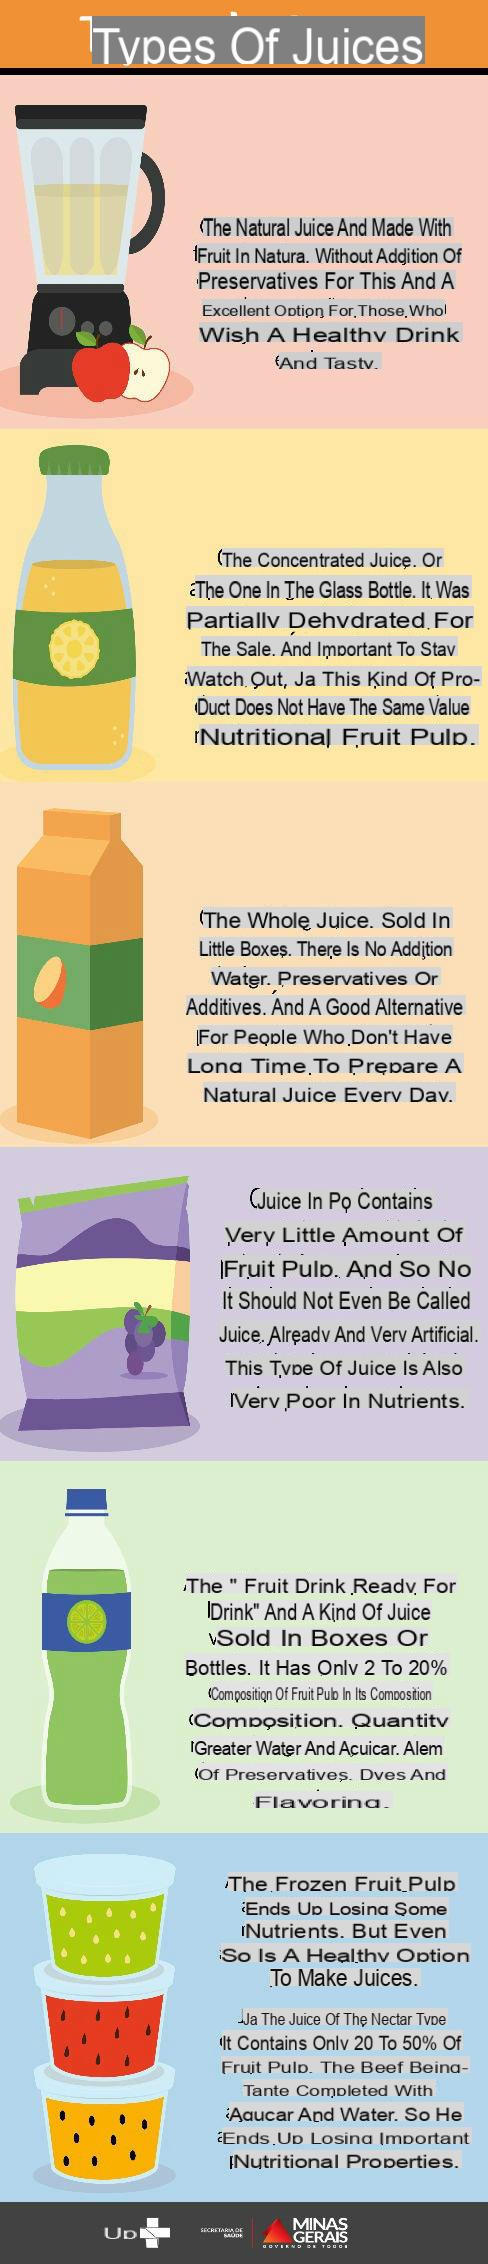 Types of fruit juices: pros and cons